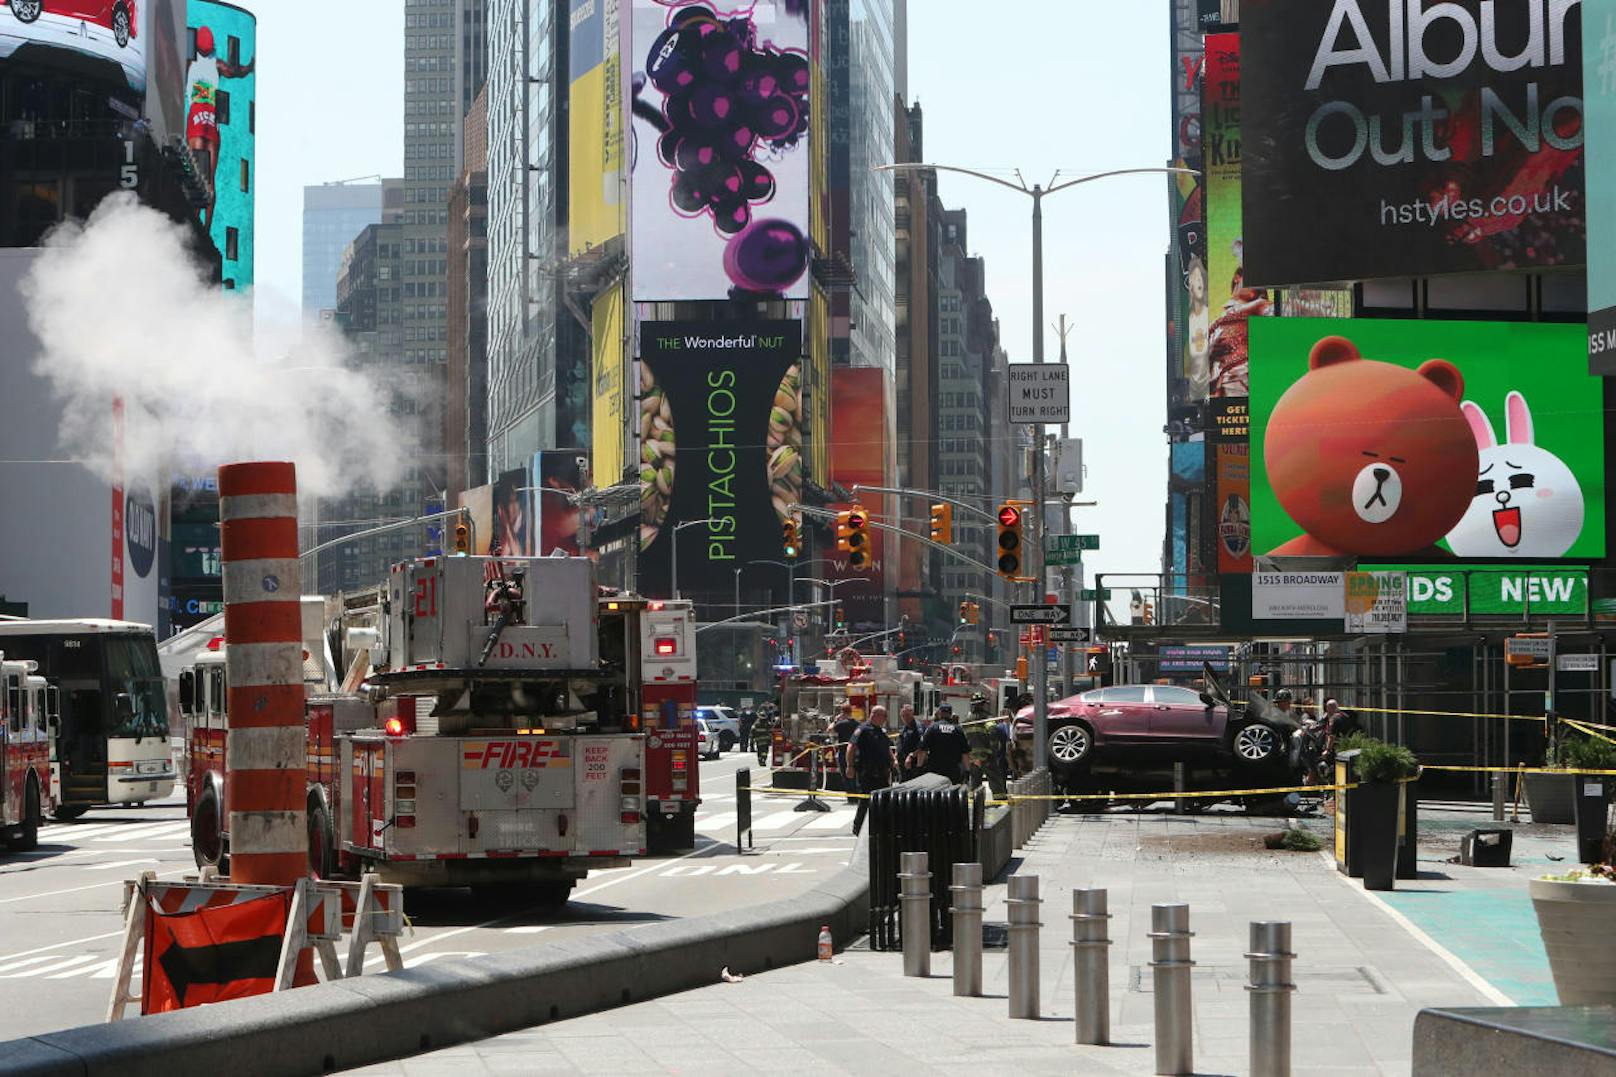 Auto rast in Menschenmenge am New Yorker Times Square